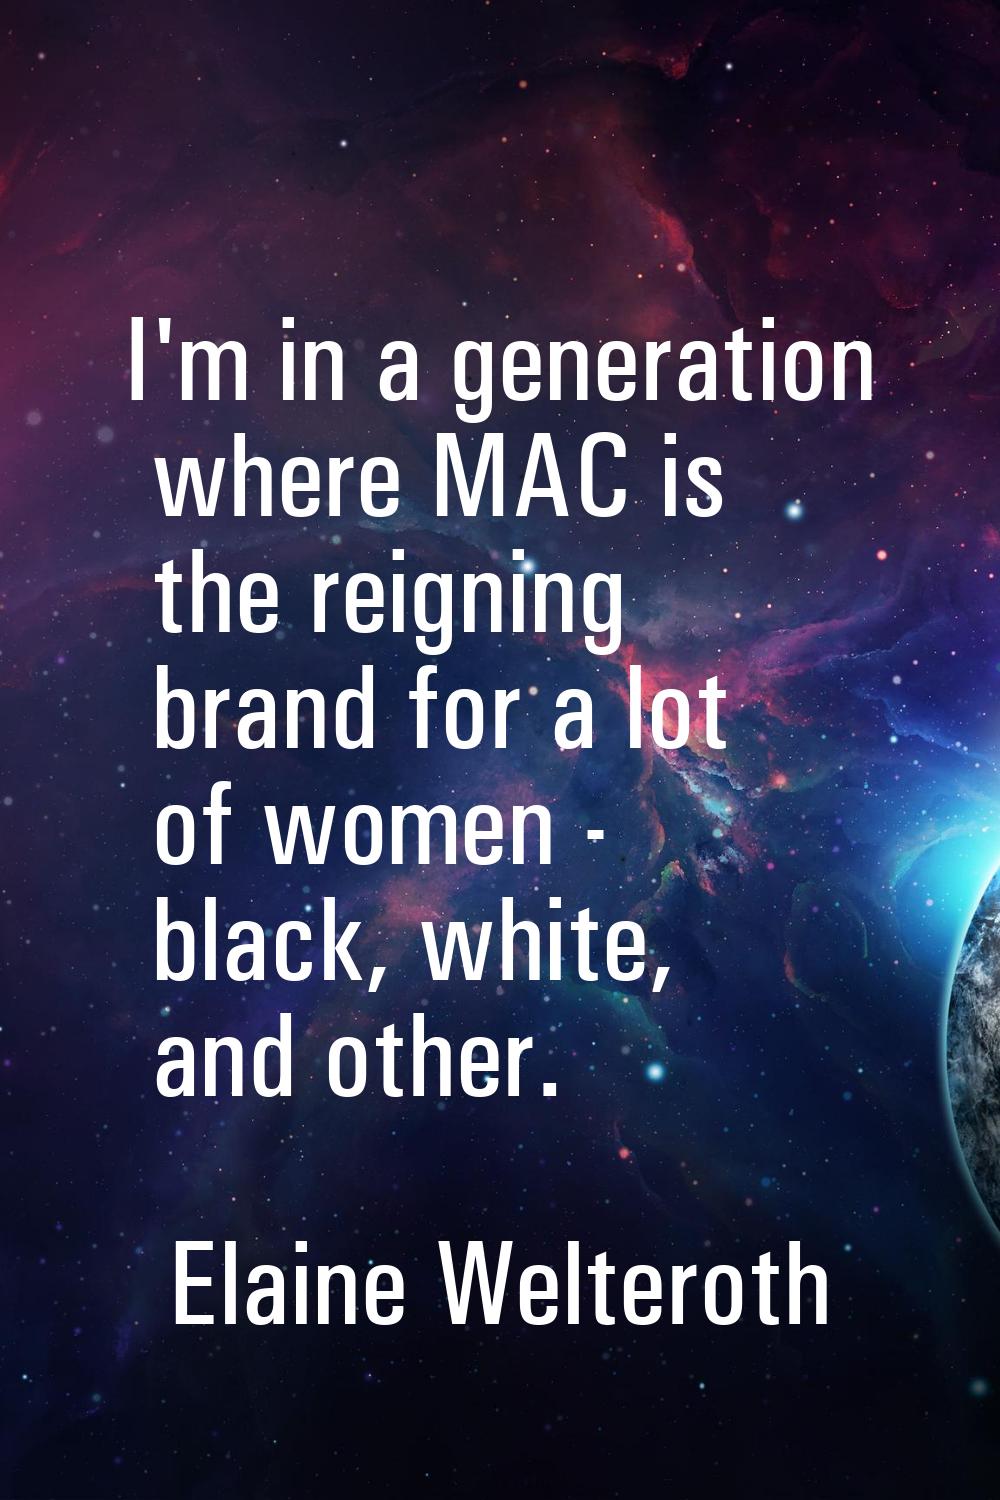 I'm in a generation where MAC is the reigning brand for a lot of women - black, white, and other.